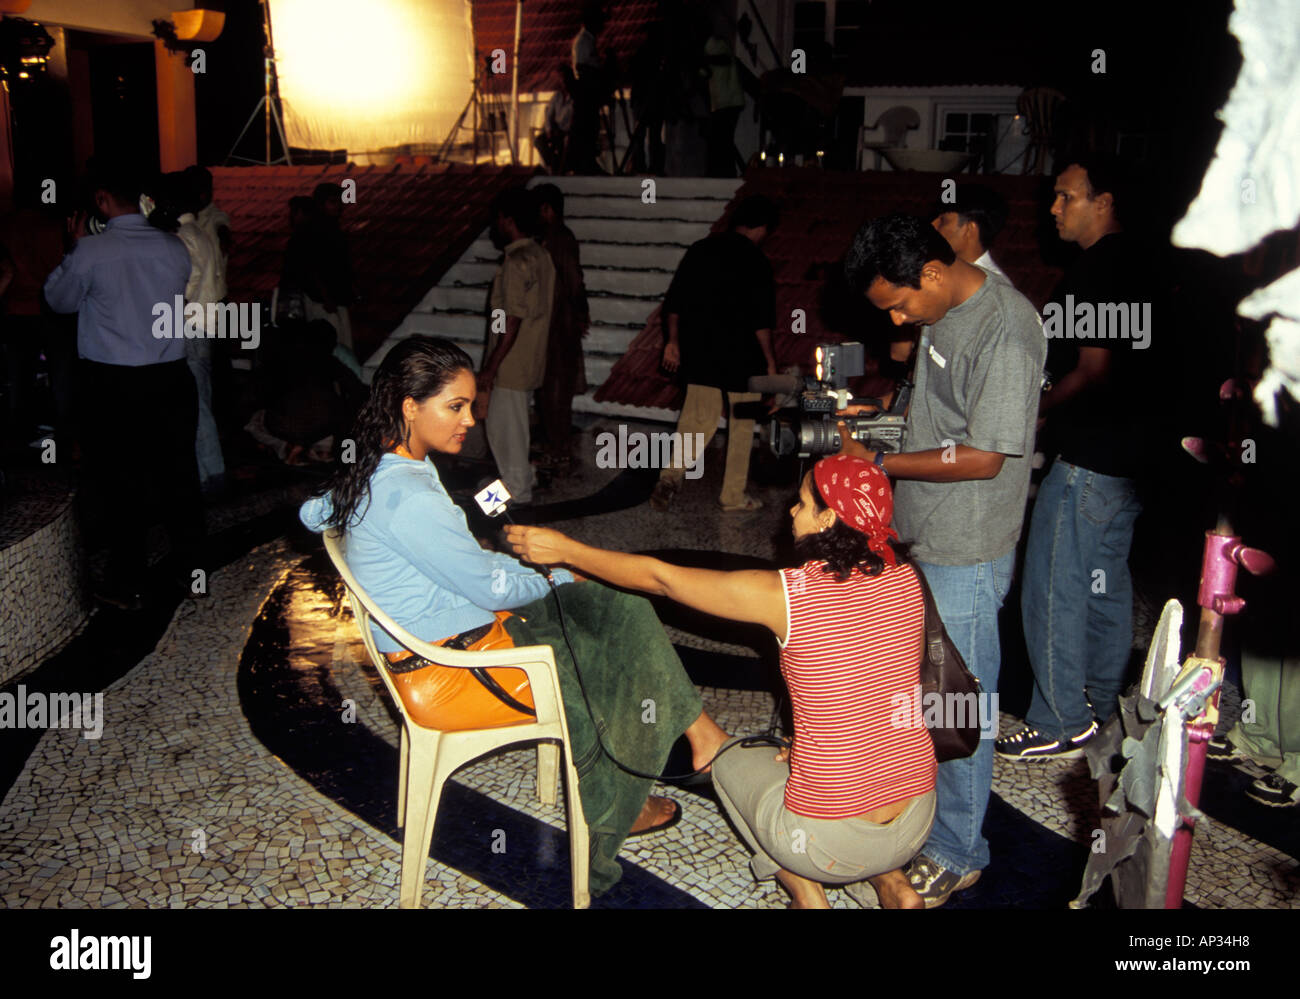 Indian actress Lara Dutta being interviewed during a break in filming for Bollywood film 'Masti', Mumbai, South India Stock Photo